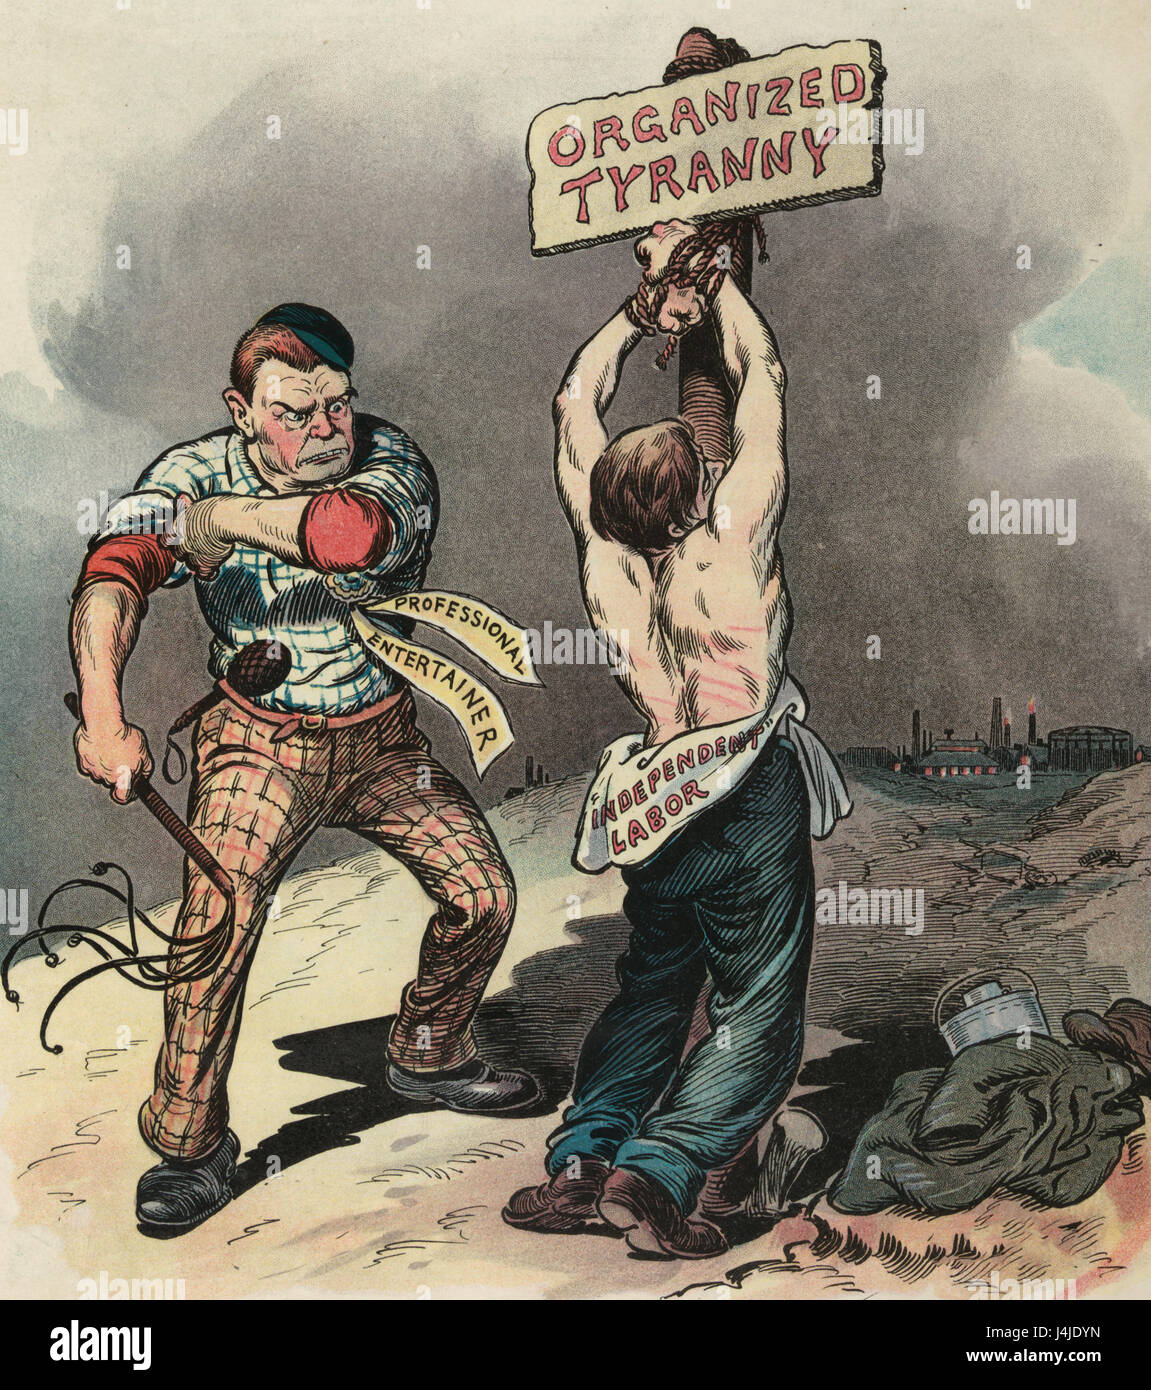 Will the white slave have a Lincoln?  Illustration shows a man labeled ''Independent' Labor' tied to a post labeled 'Organized Tyranny' and being whipped by a man labeled 'Professional Entertainer'; in the background, a factory is burning. Political Cartoon, 1904 Stock Photo